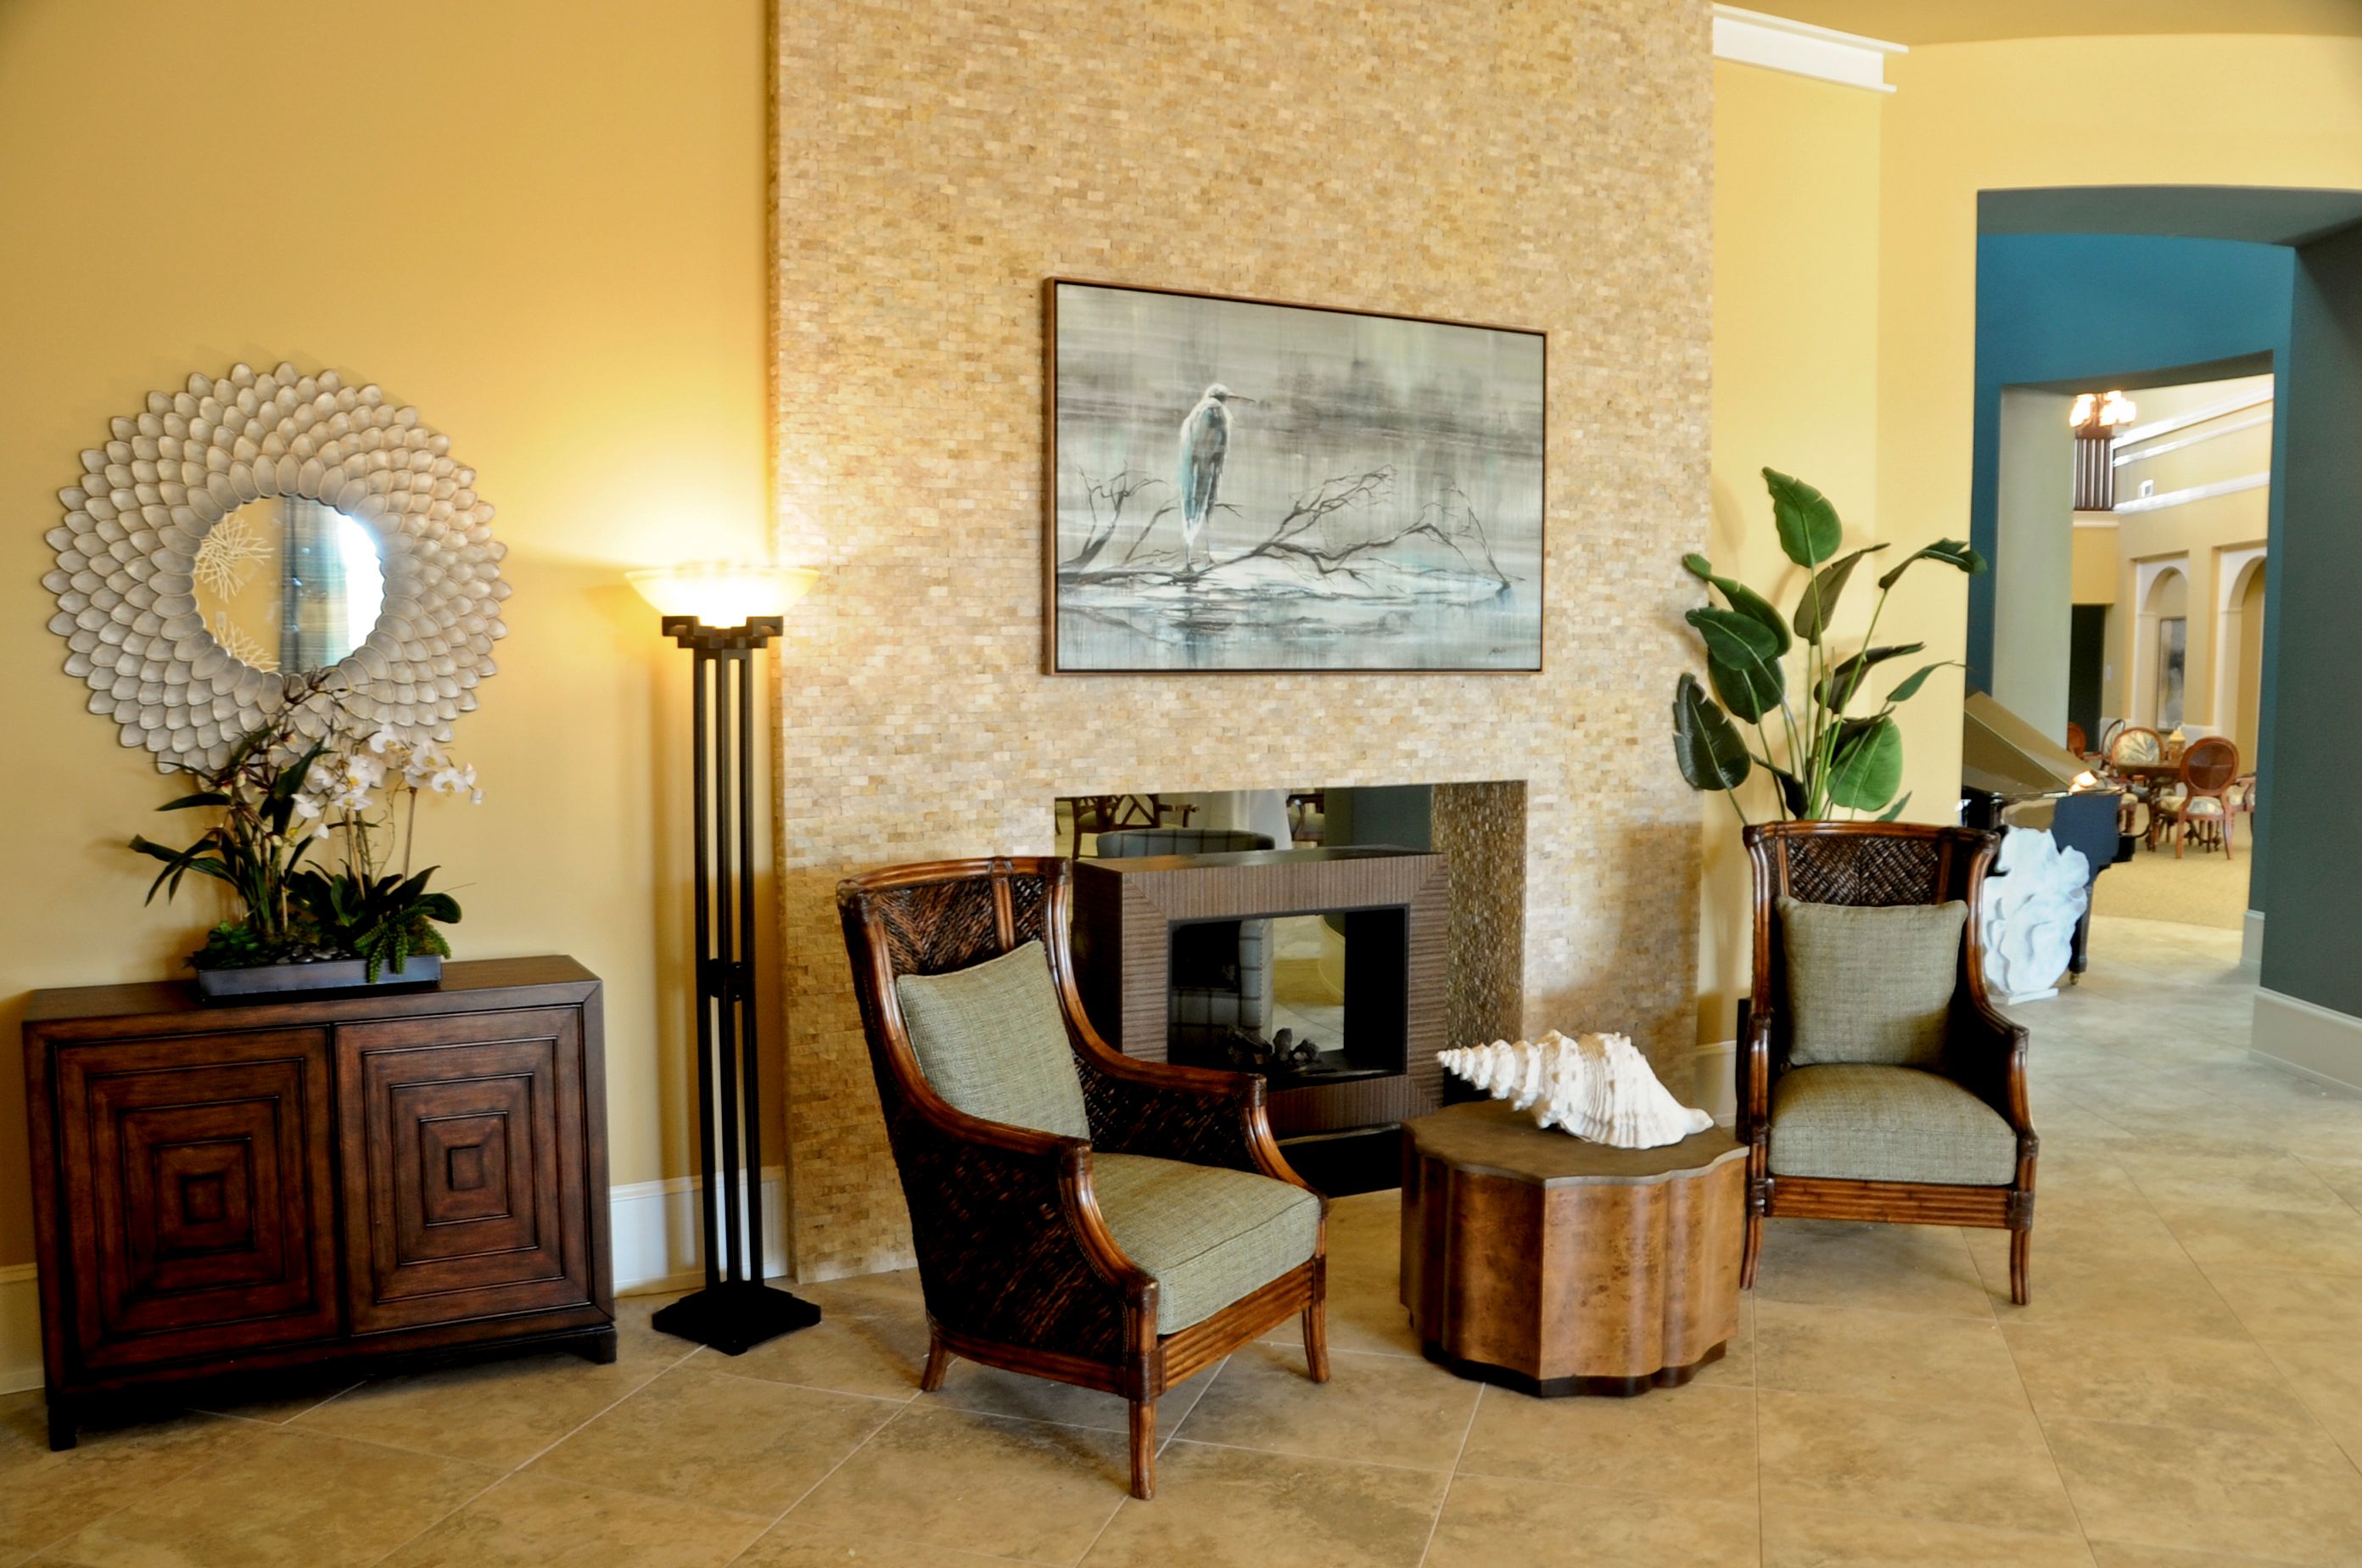 Interior view of Silver Creek senior living community featuring tasteful decor and a cozy fireplace.